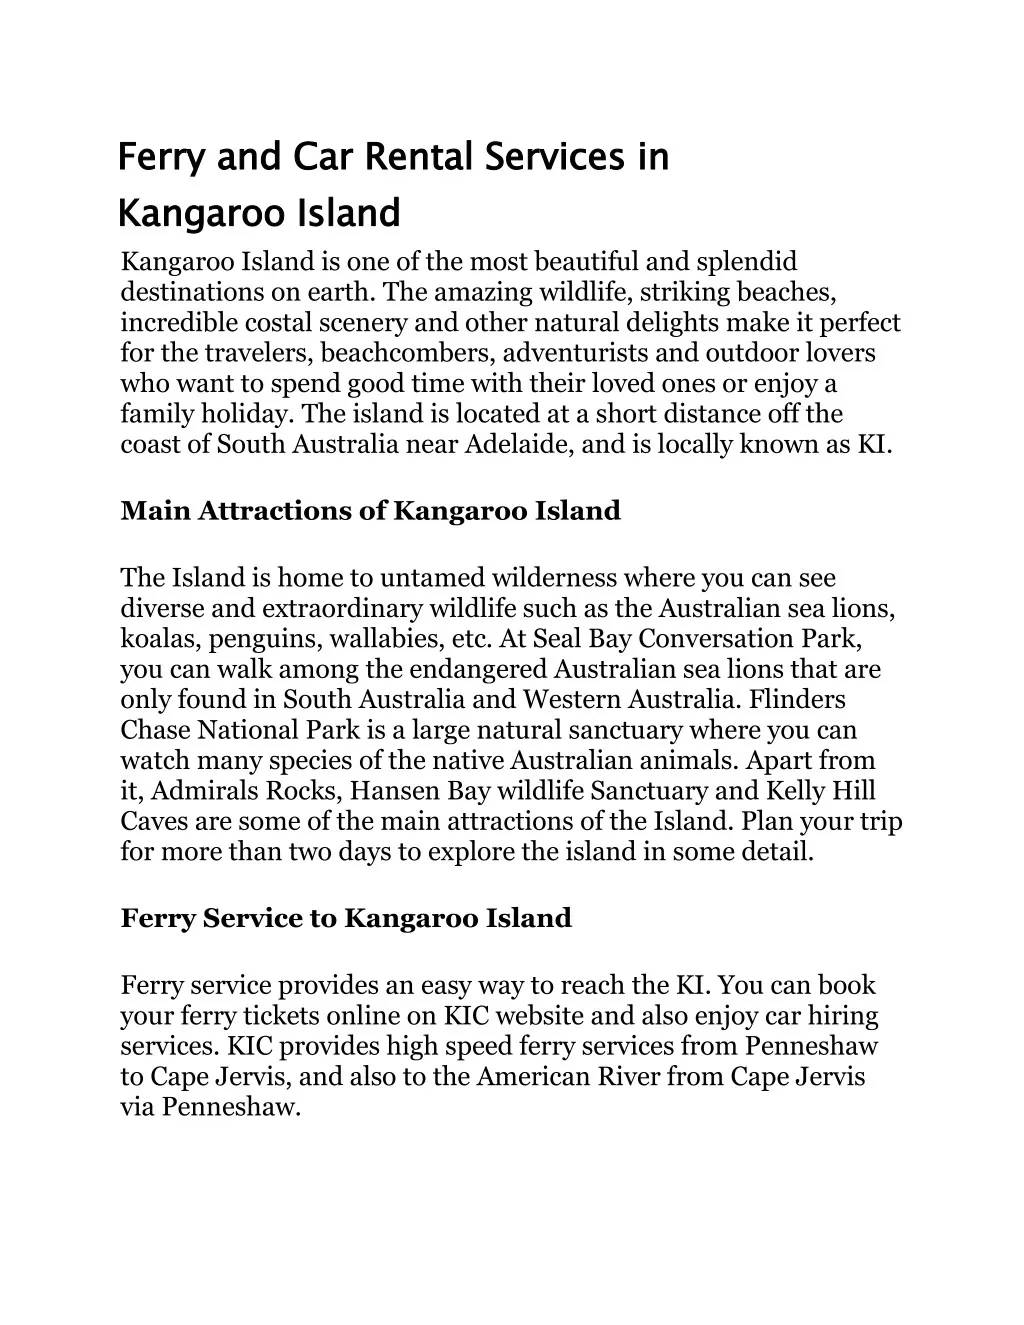 ferry and car rental services in kangaroo